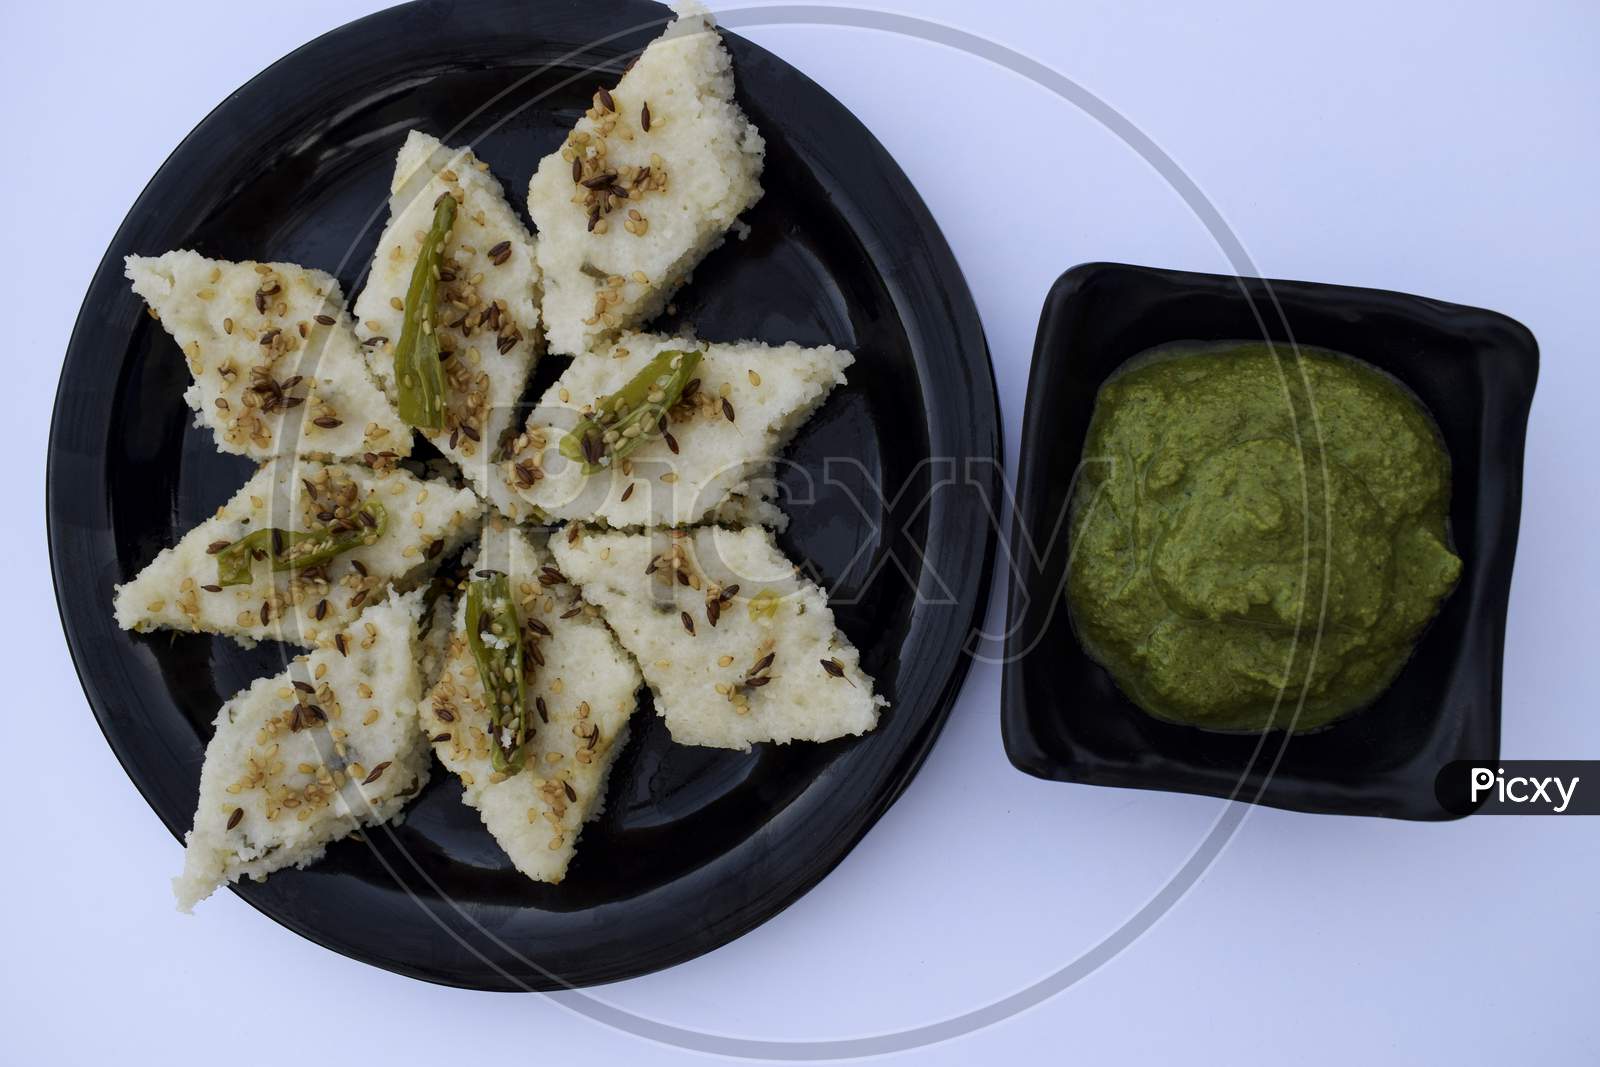 Vrat Ka Khana Farali Gujarati Cuisine. Faral Ka White Dhokla Made From Sago Flour And Garnished With Green Chilly And Sesame Seeds. Eaten During Vrat Upawas Fasting Food From Gujarat India.